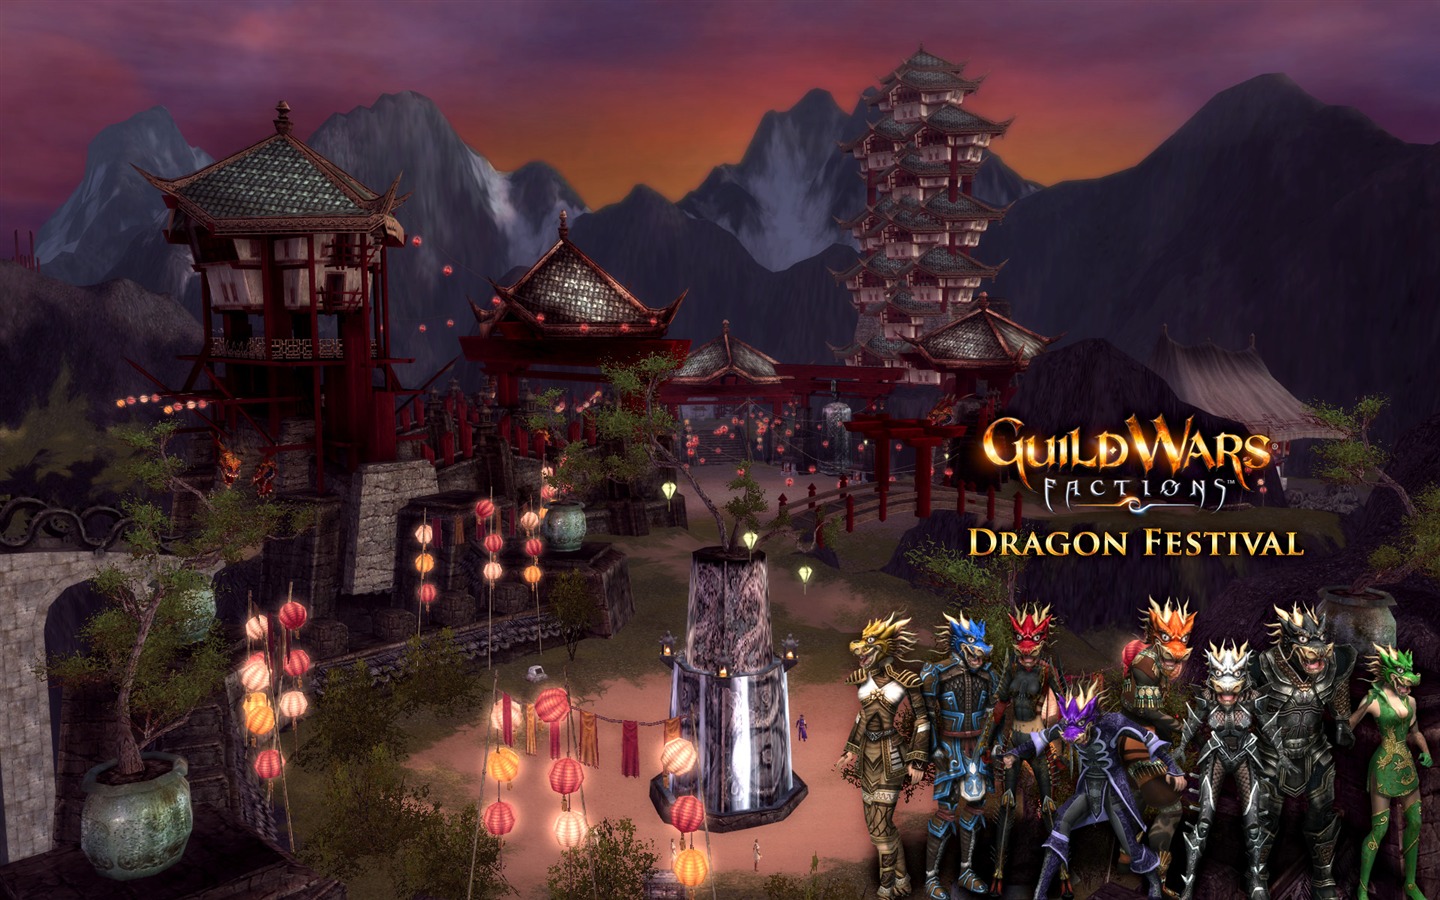 Guildwars tapety (3) #19 - 1440x900